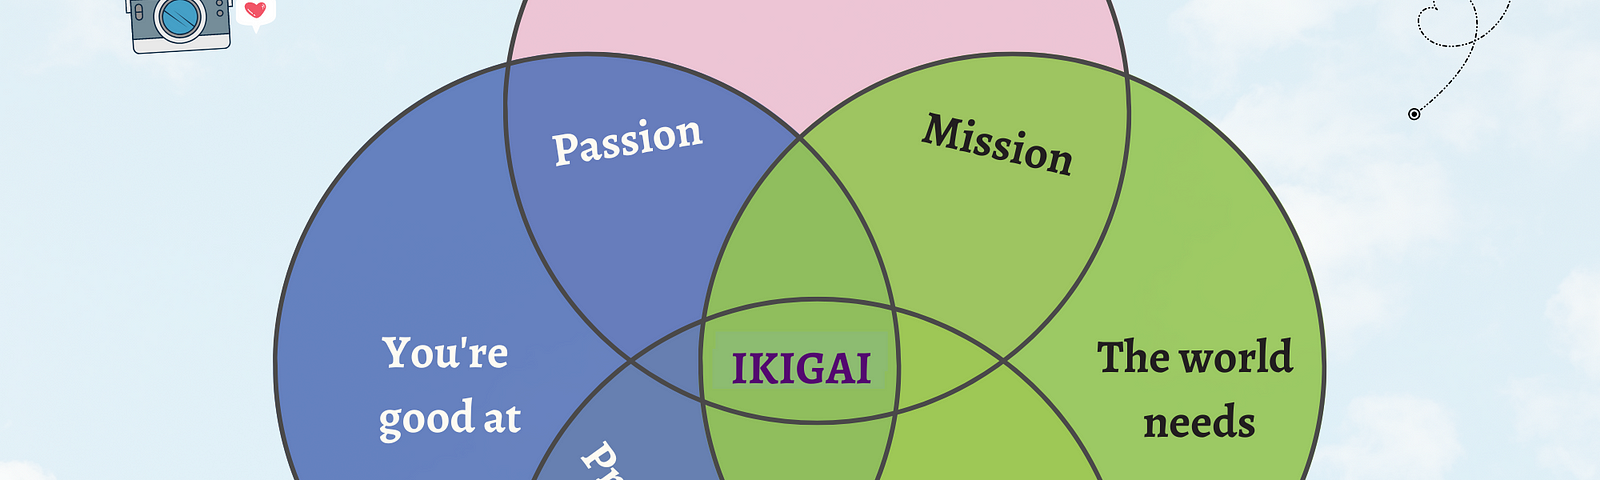 The Art of Finding Your IKIGAI in Western Version.